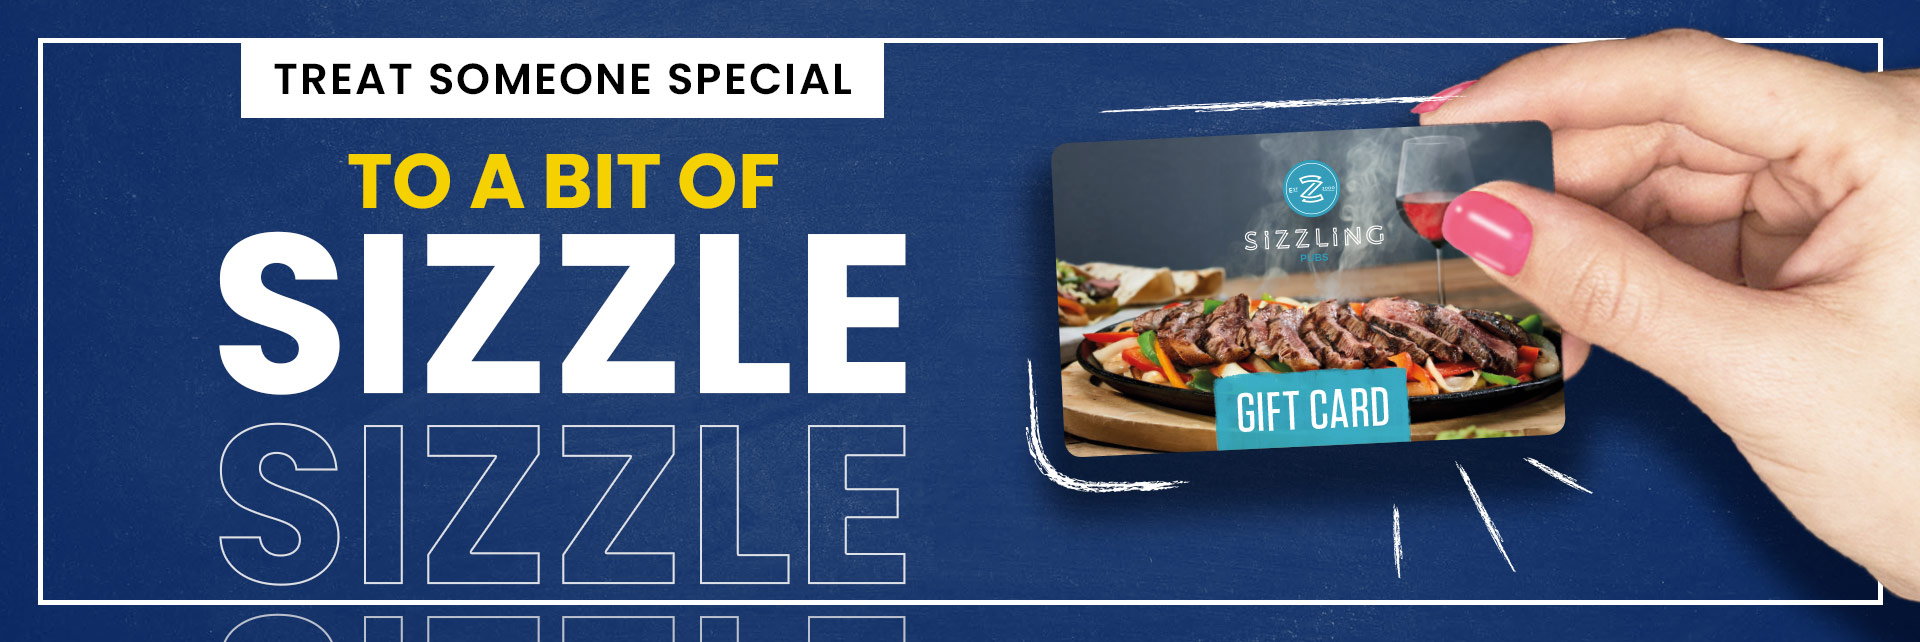 Sizzling Pubs Gift Card at Buckinghamshire Yeoman in Aylesbury